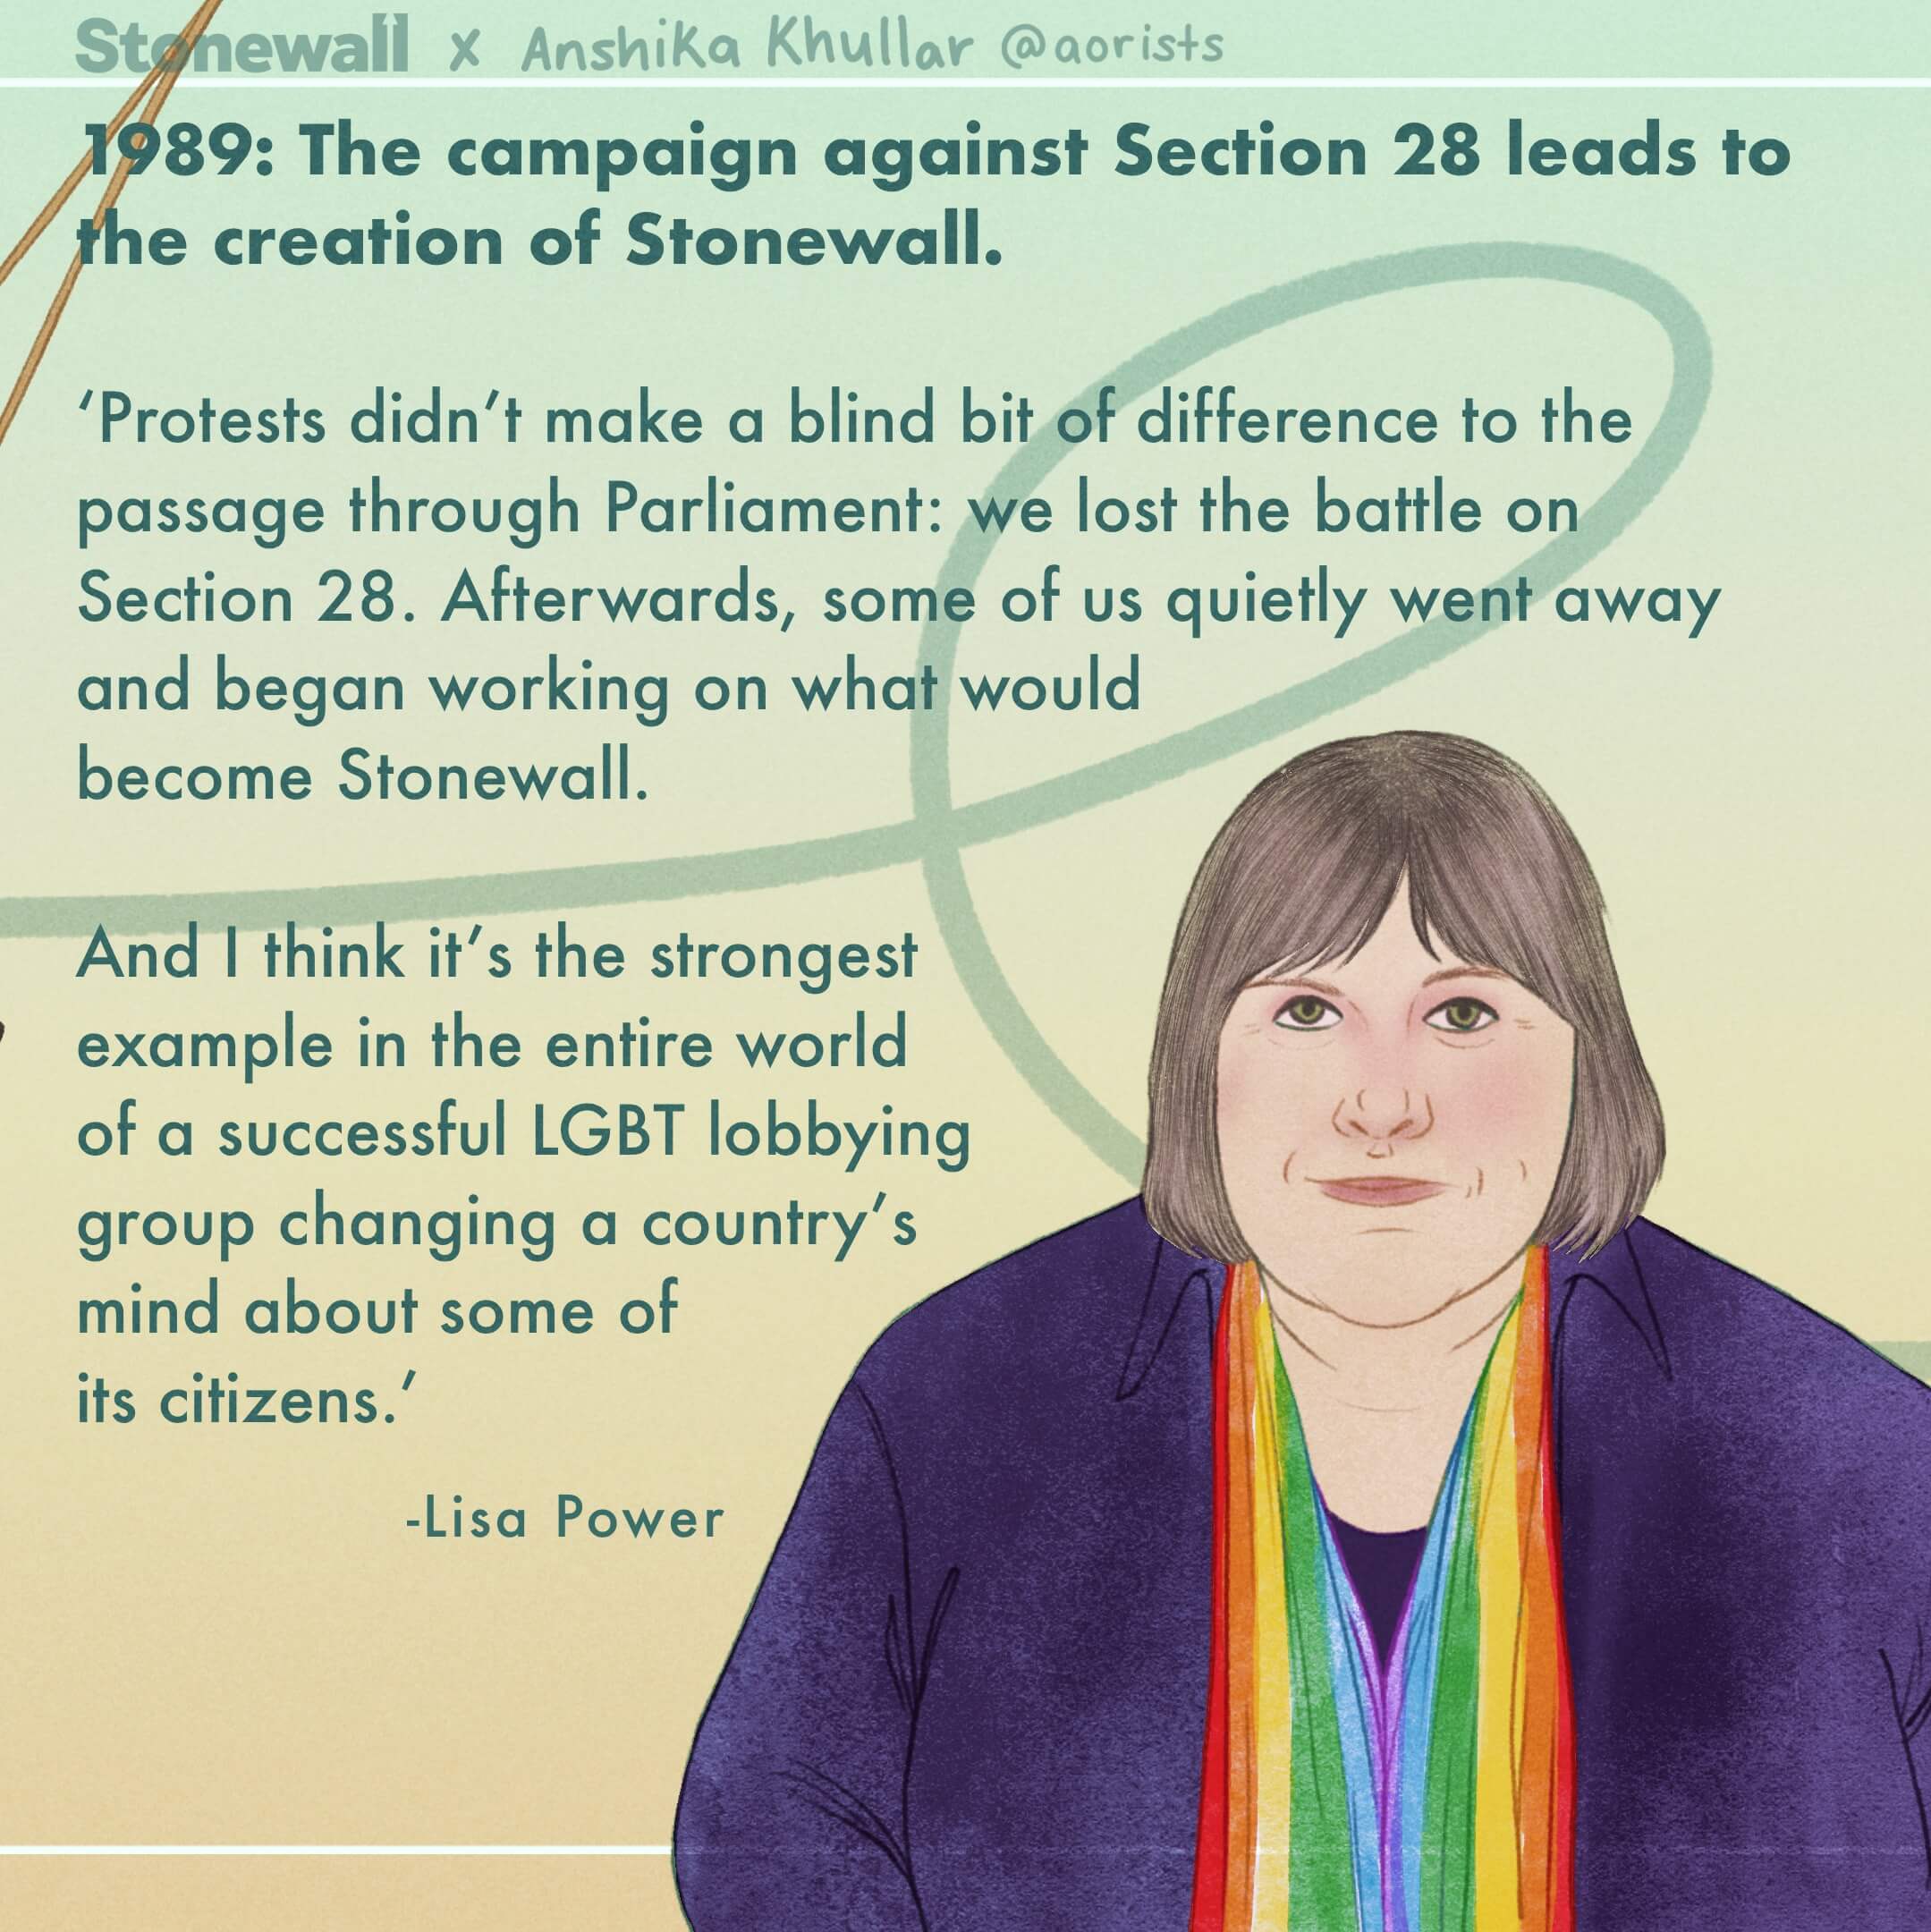 1989: The campaign against Section 28 leads to the creation of Stonewall. ‘Protests didn’t make a blind bit of difference to the passage through Parliament: we lost the battle on Section 28. Afterwards, some of us quietly went away and began working on what would become Stonewall. And I think it’s the strongest example in the entire world of a successful LGBT lobbying group changing a country’s mind about some of its citizens.’ Illustration of: Lisa Power